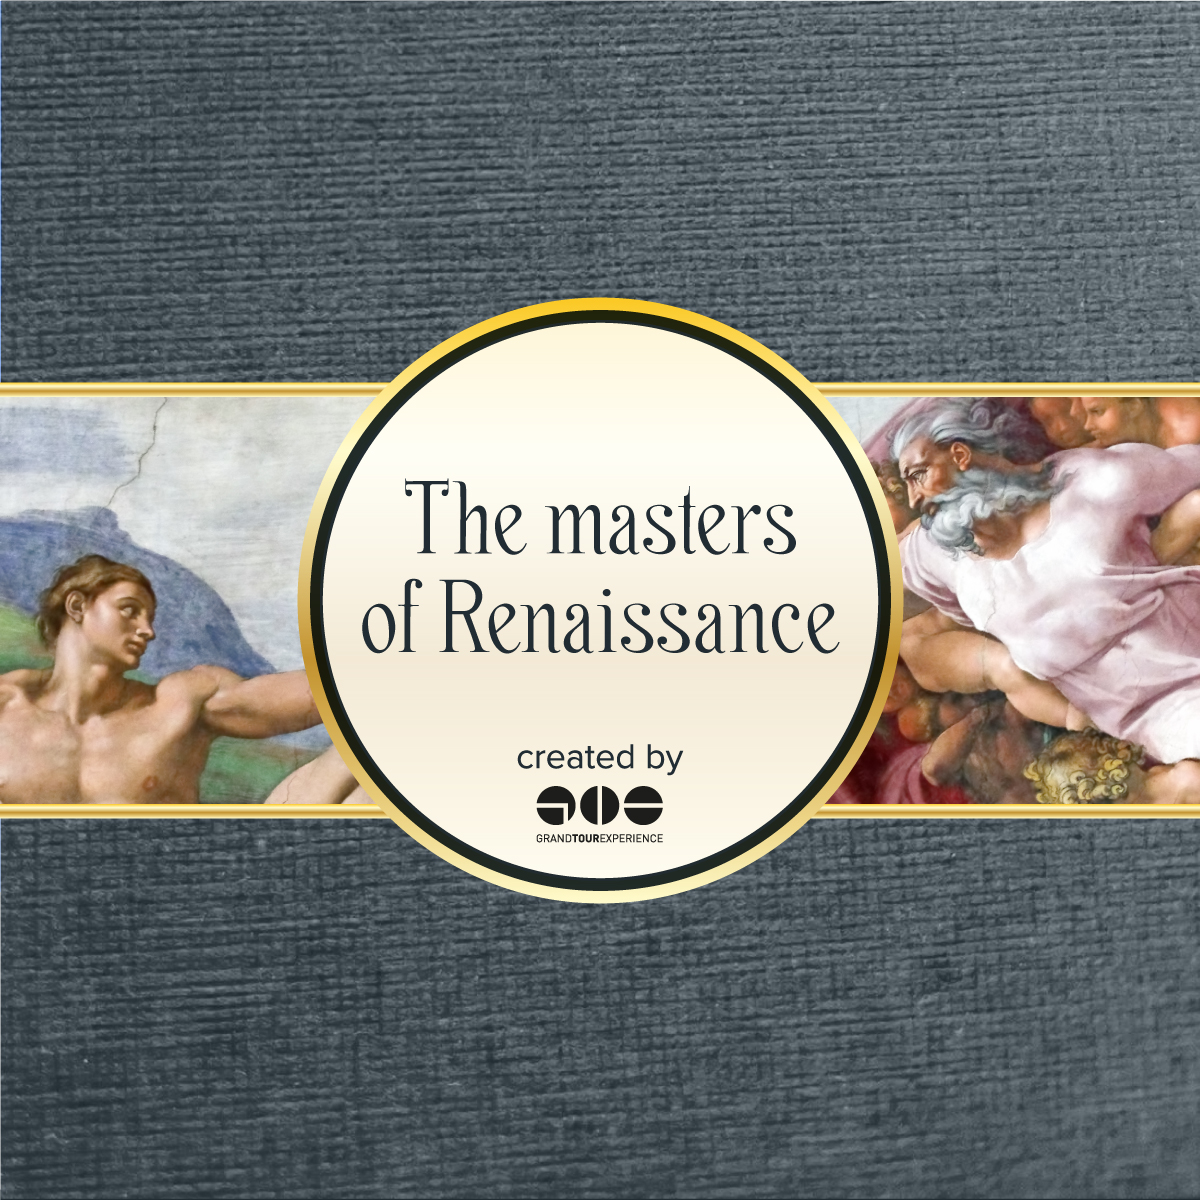 Rome: the Masters of Renaissance